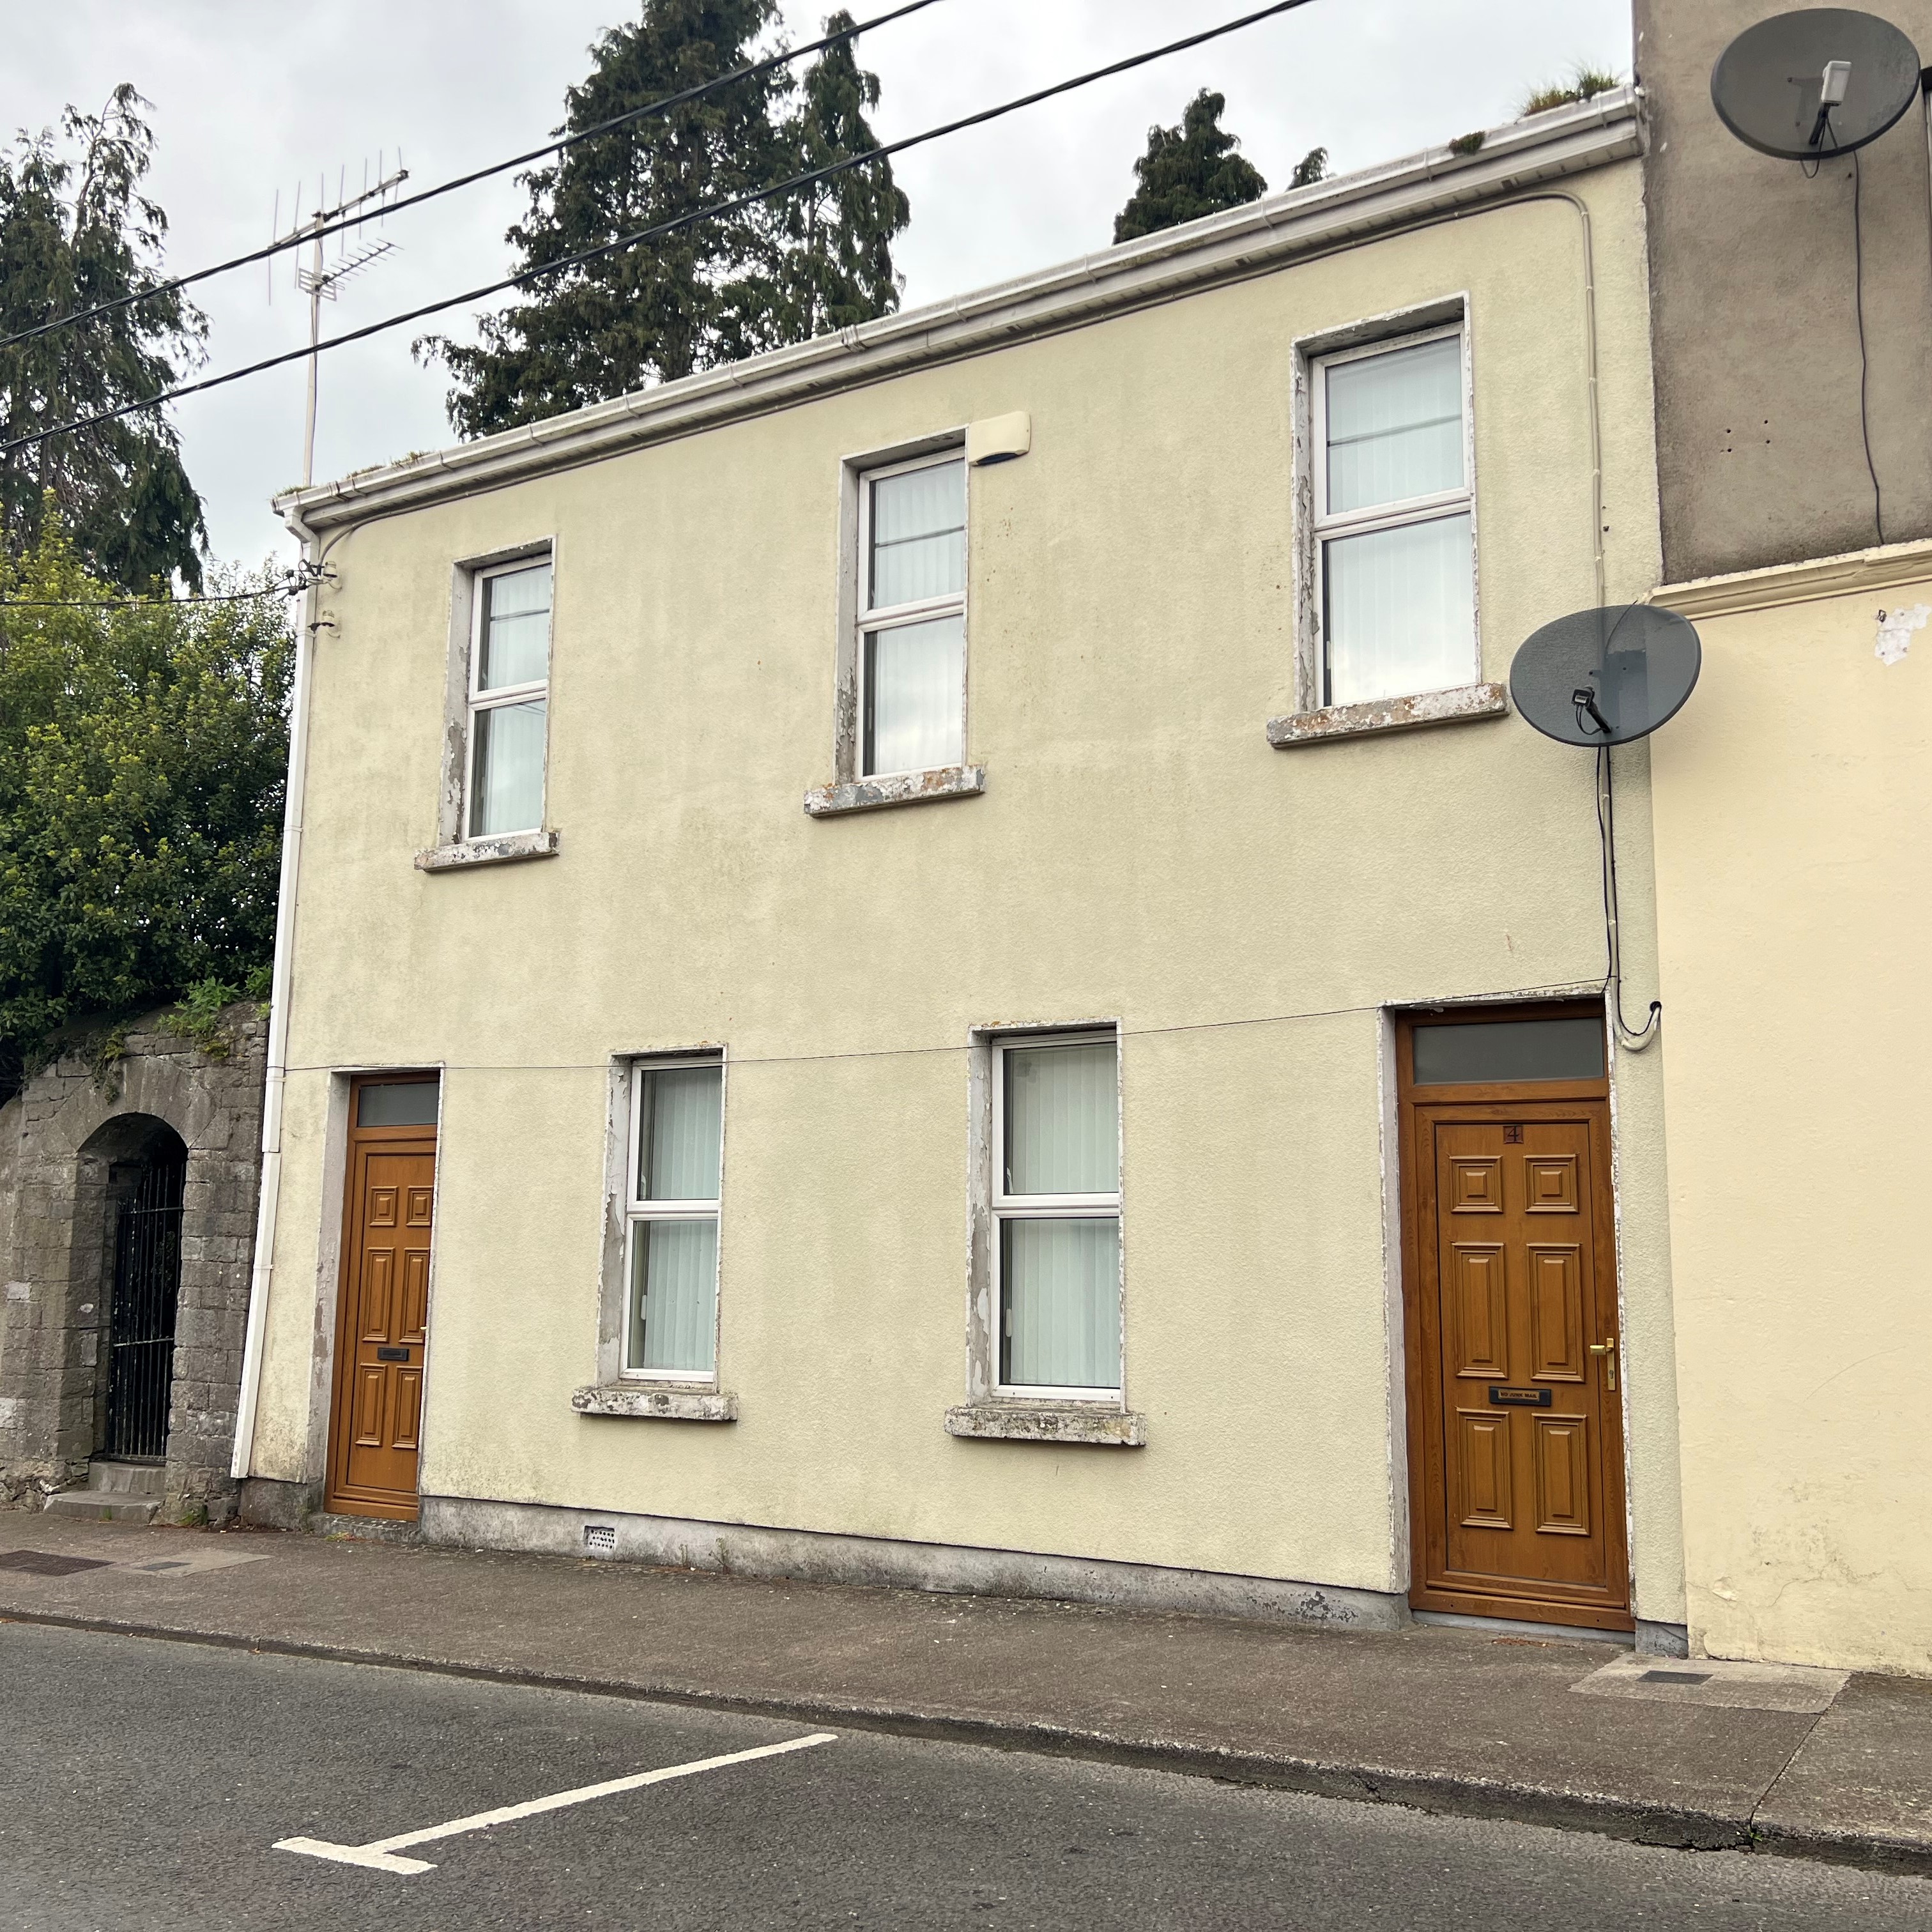 4 John St, Tipperary Town, County Tipperary